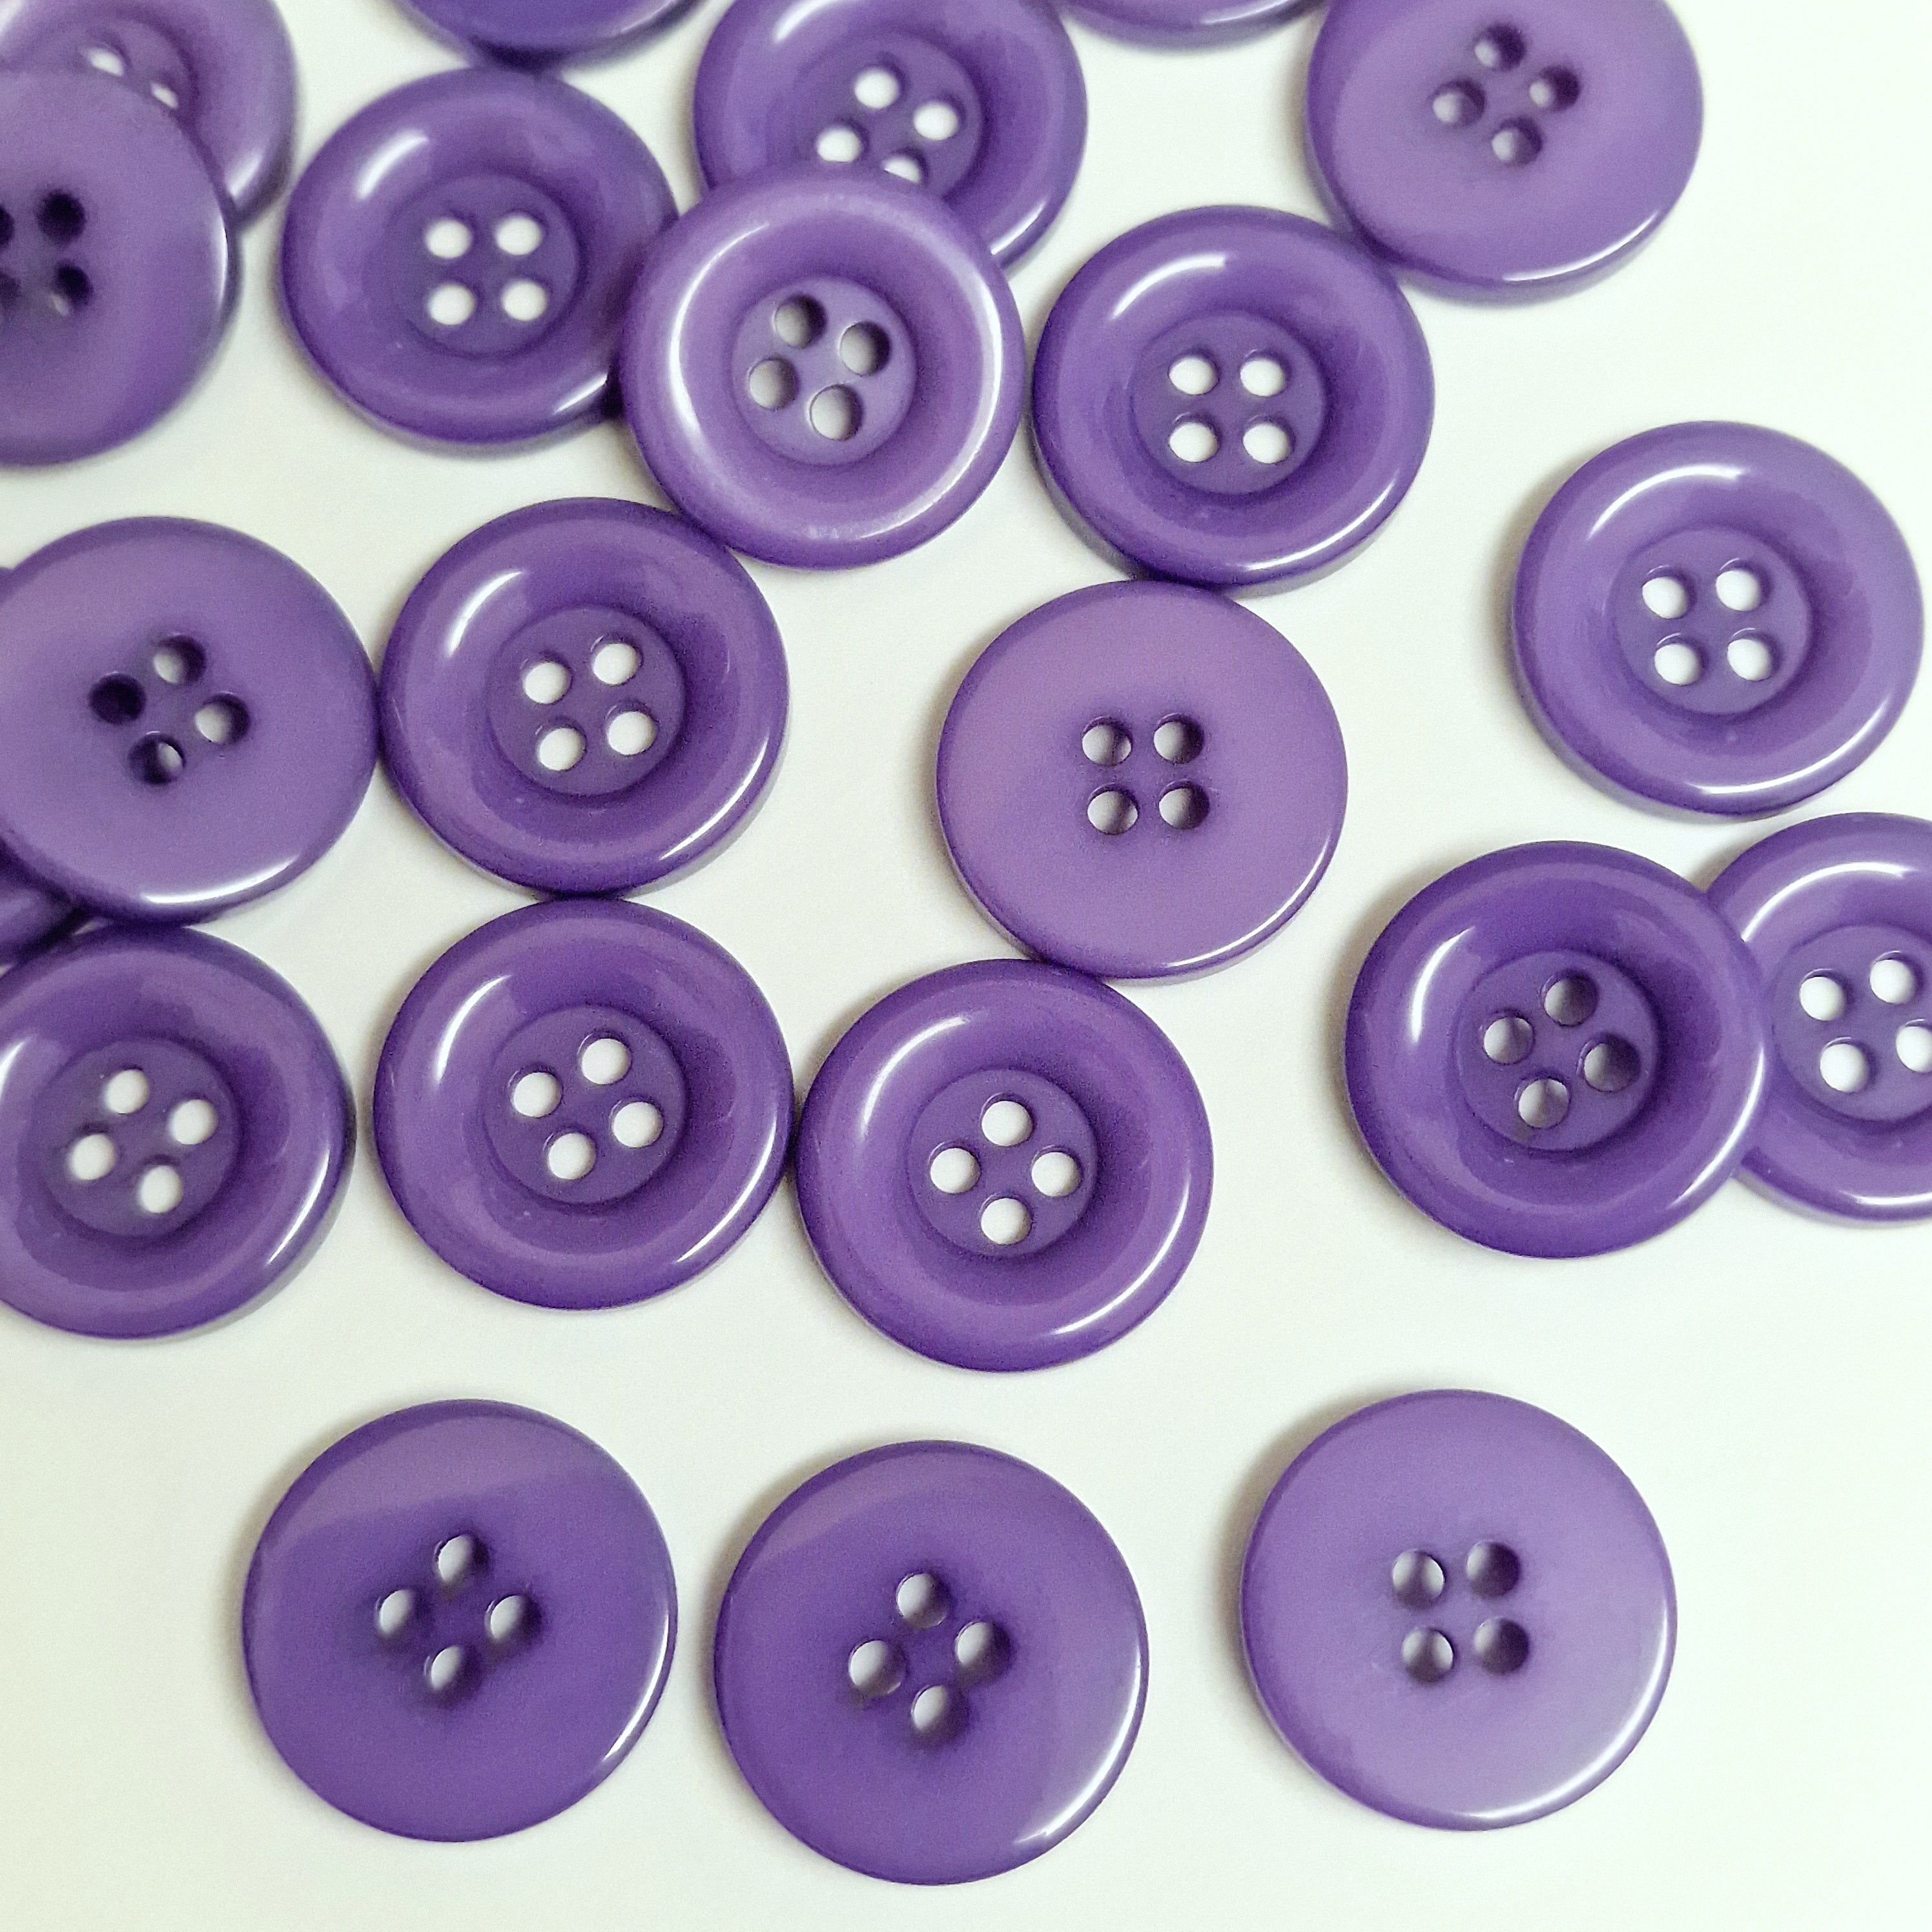 MajorCrafts 48pcs 15mm Purple 4 Holes Thick Edge Round Resin Sewing Buttons